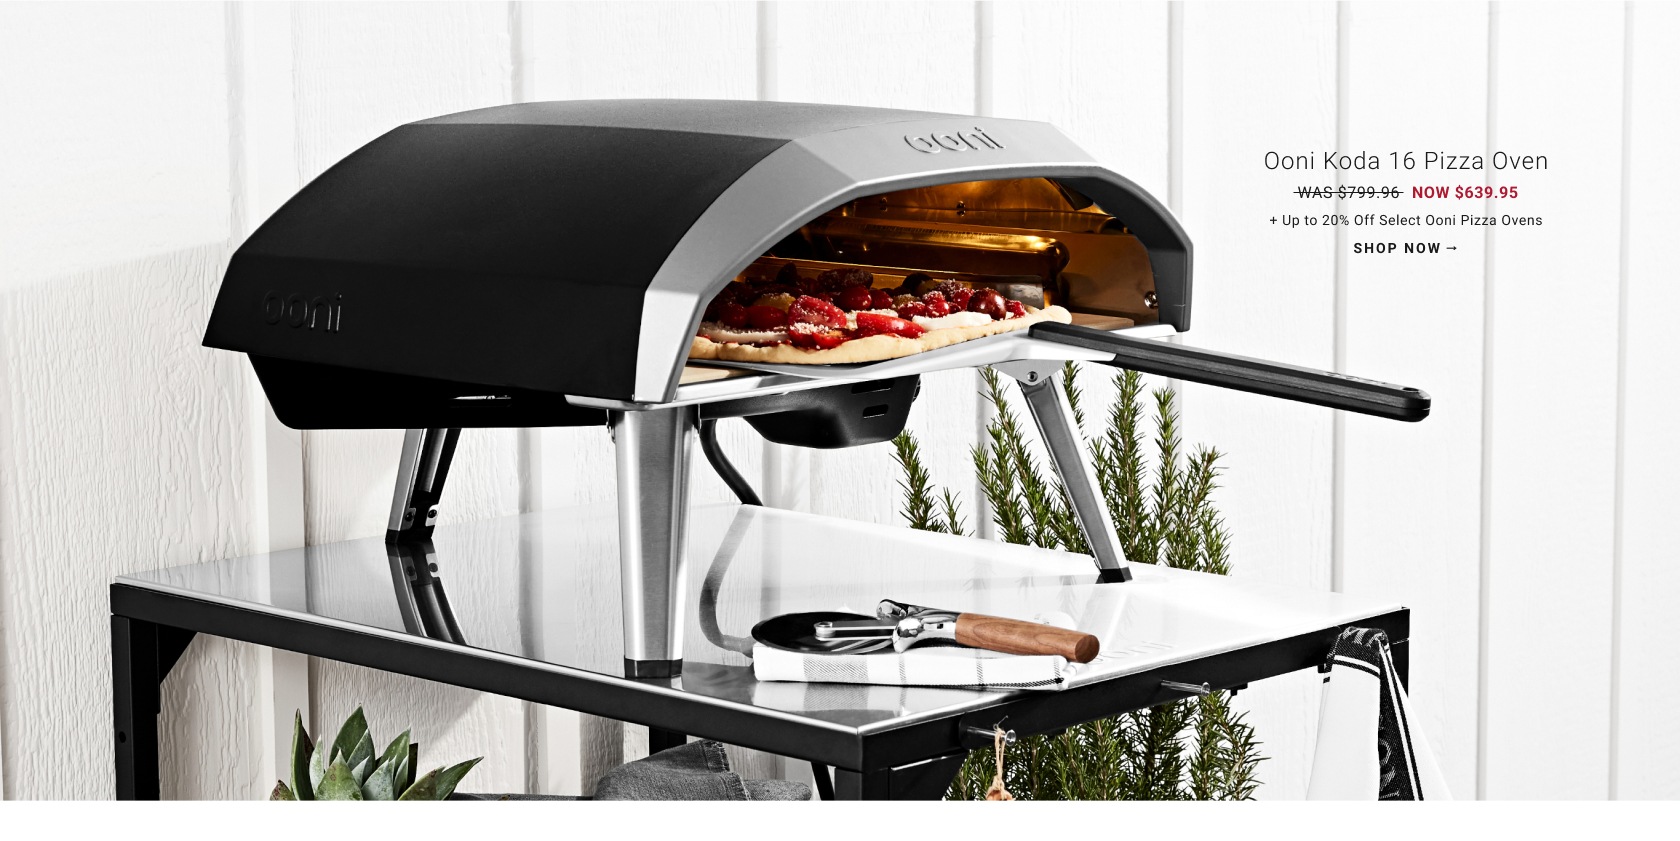 Warehouse Sale - Up to 20% Off Select Ooni Pizza Ovens